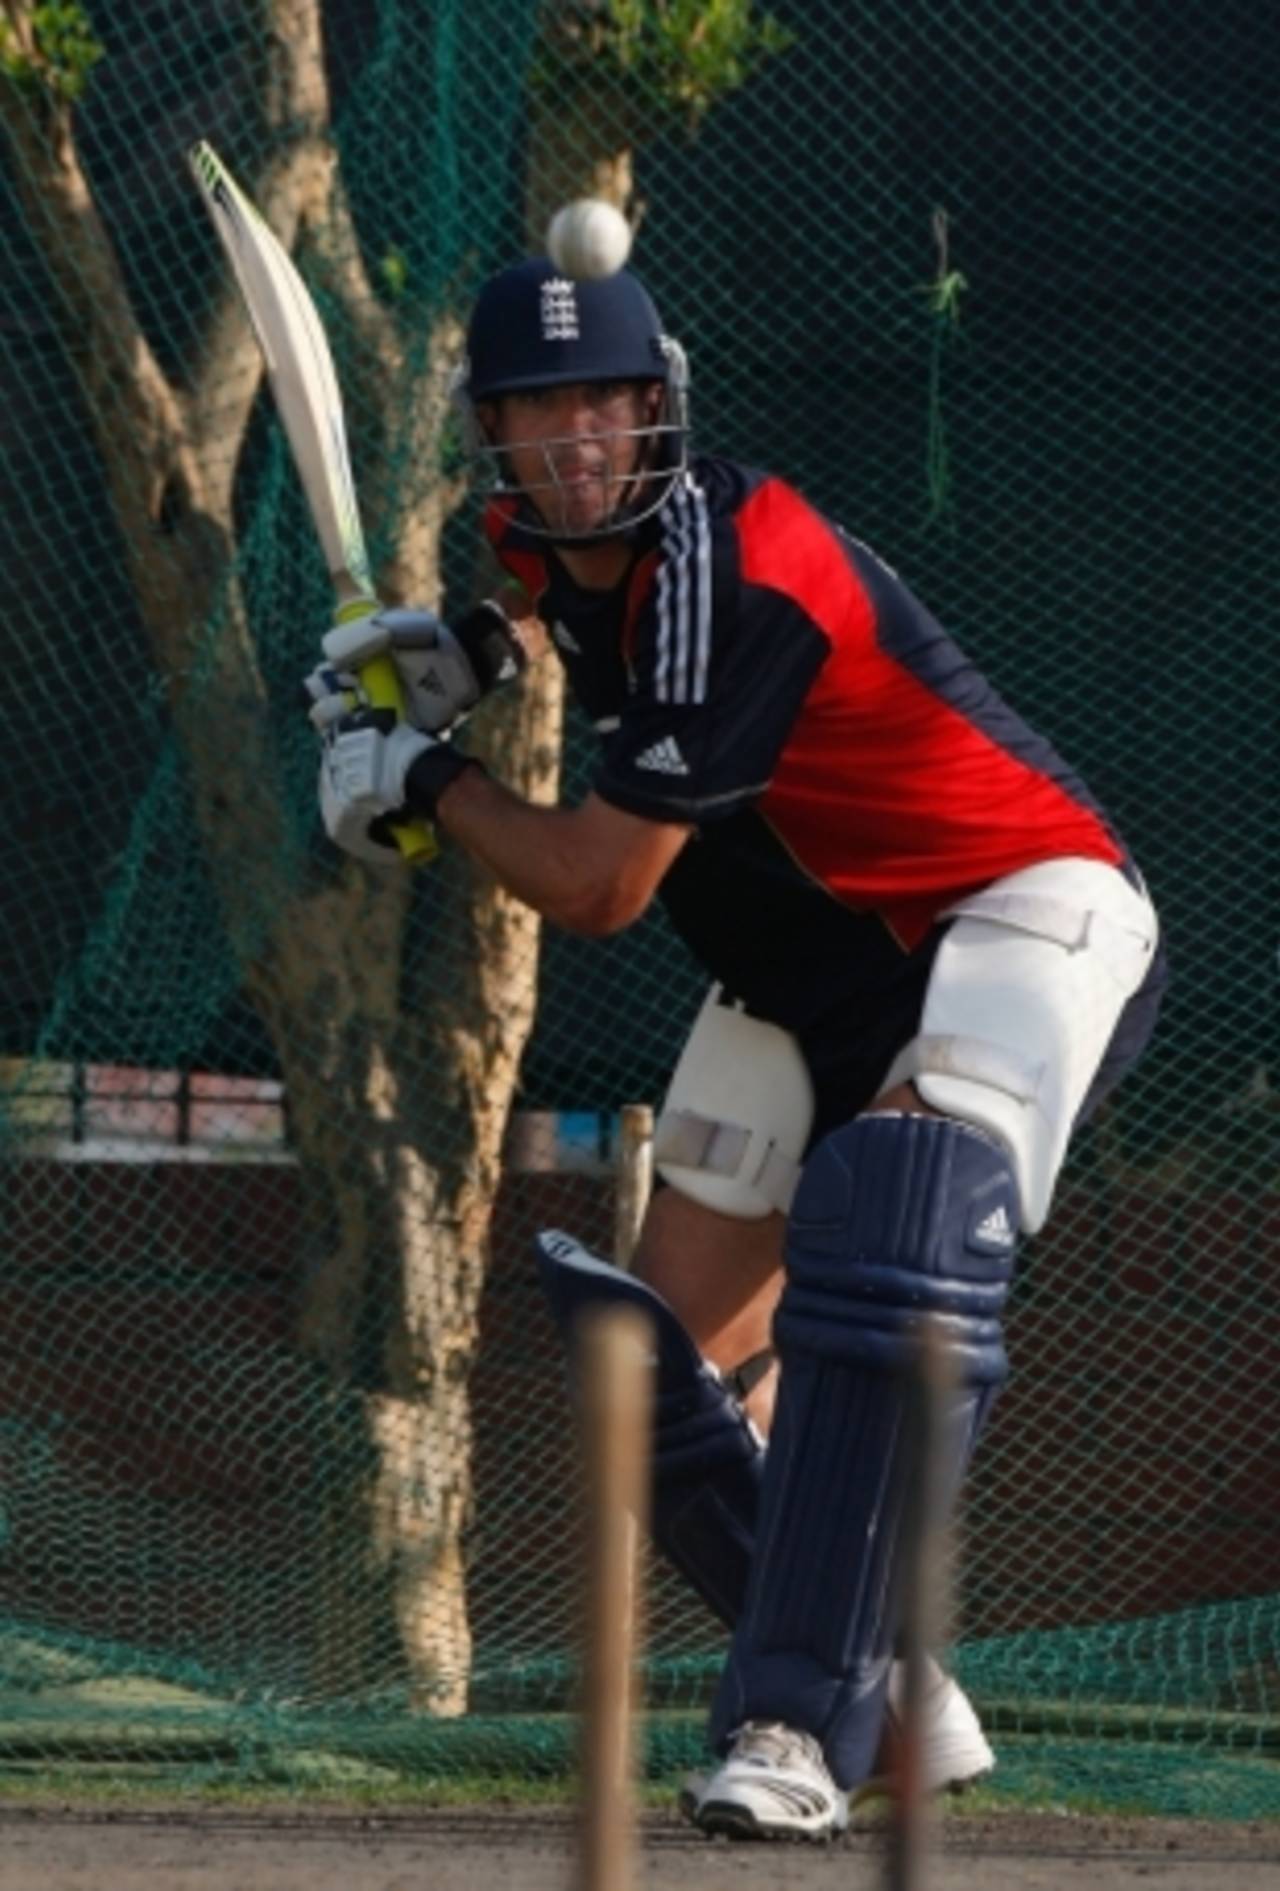 Kevin Pietersen in the nets ahead of the second ODI between England and Bangladesh, Dhaka, March 1, 2010